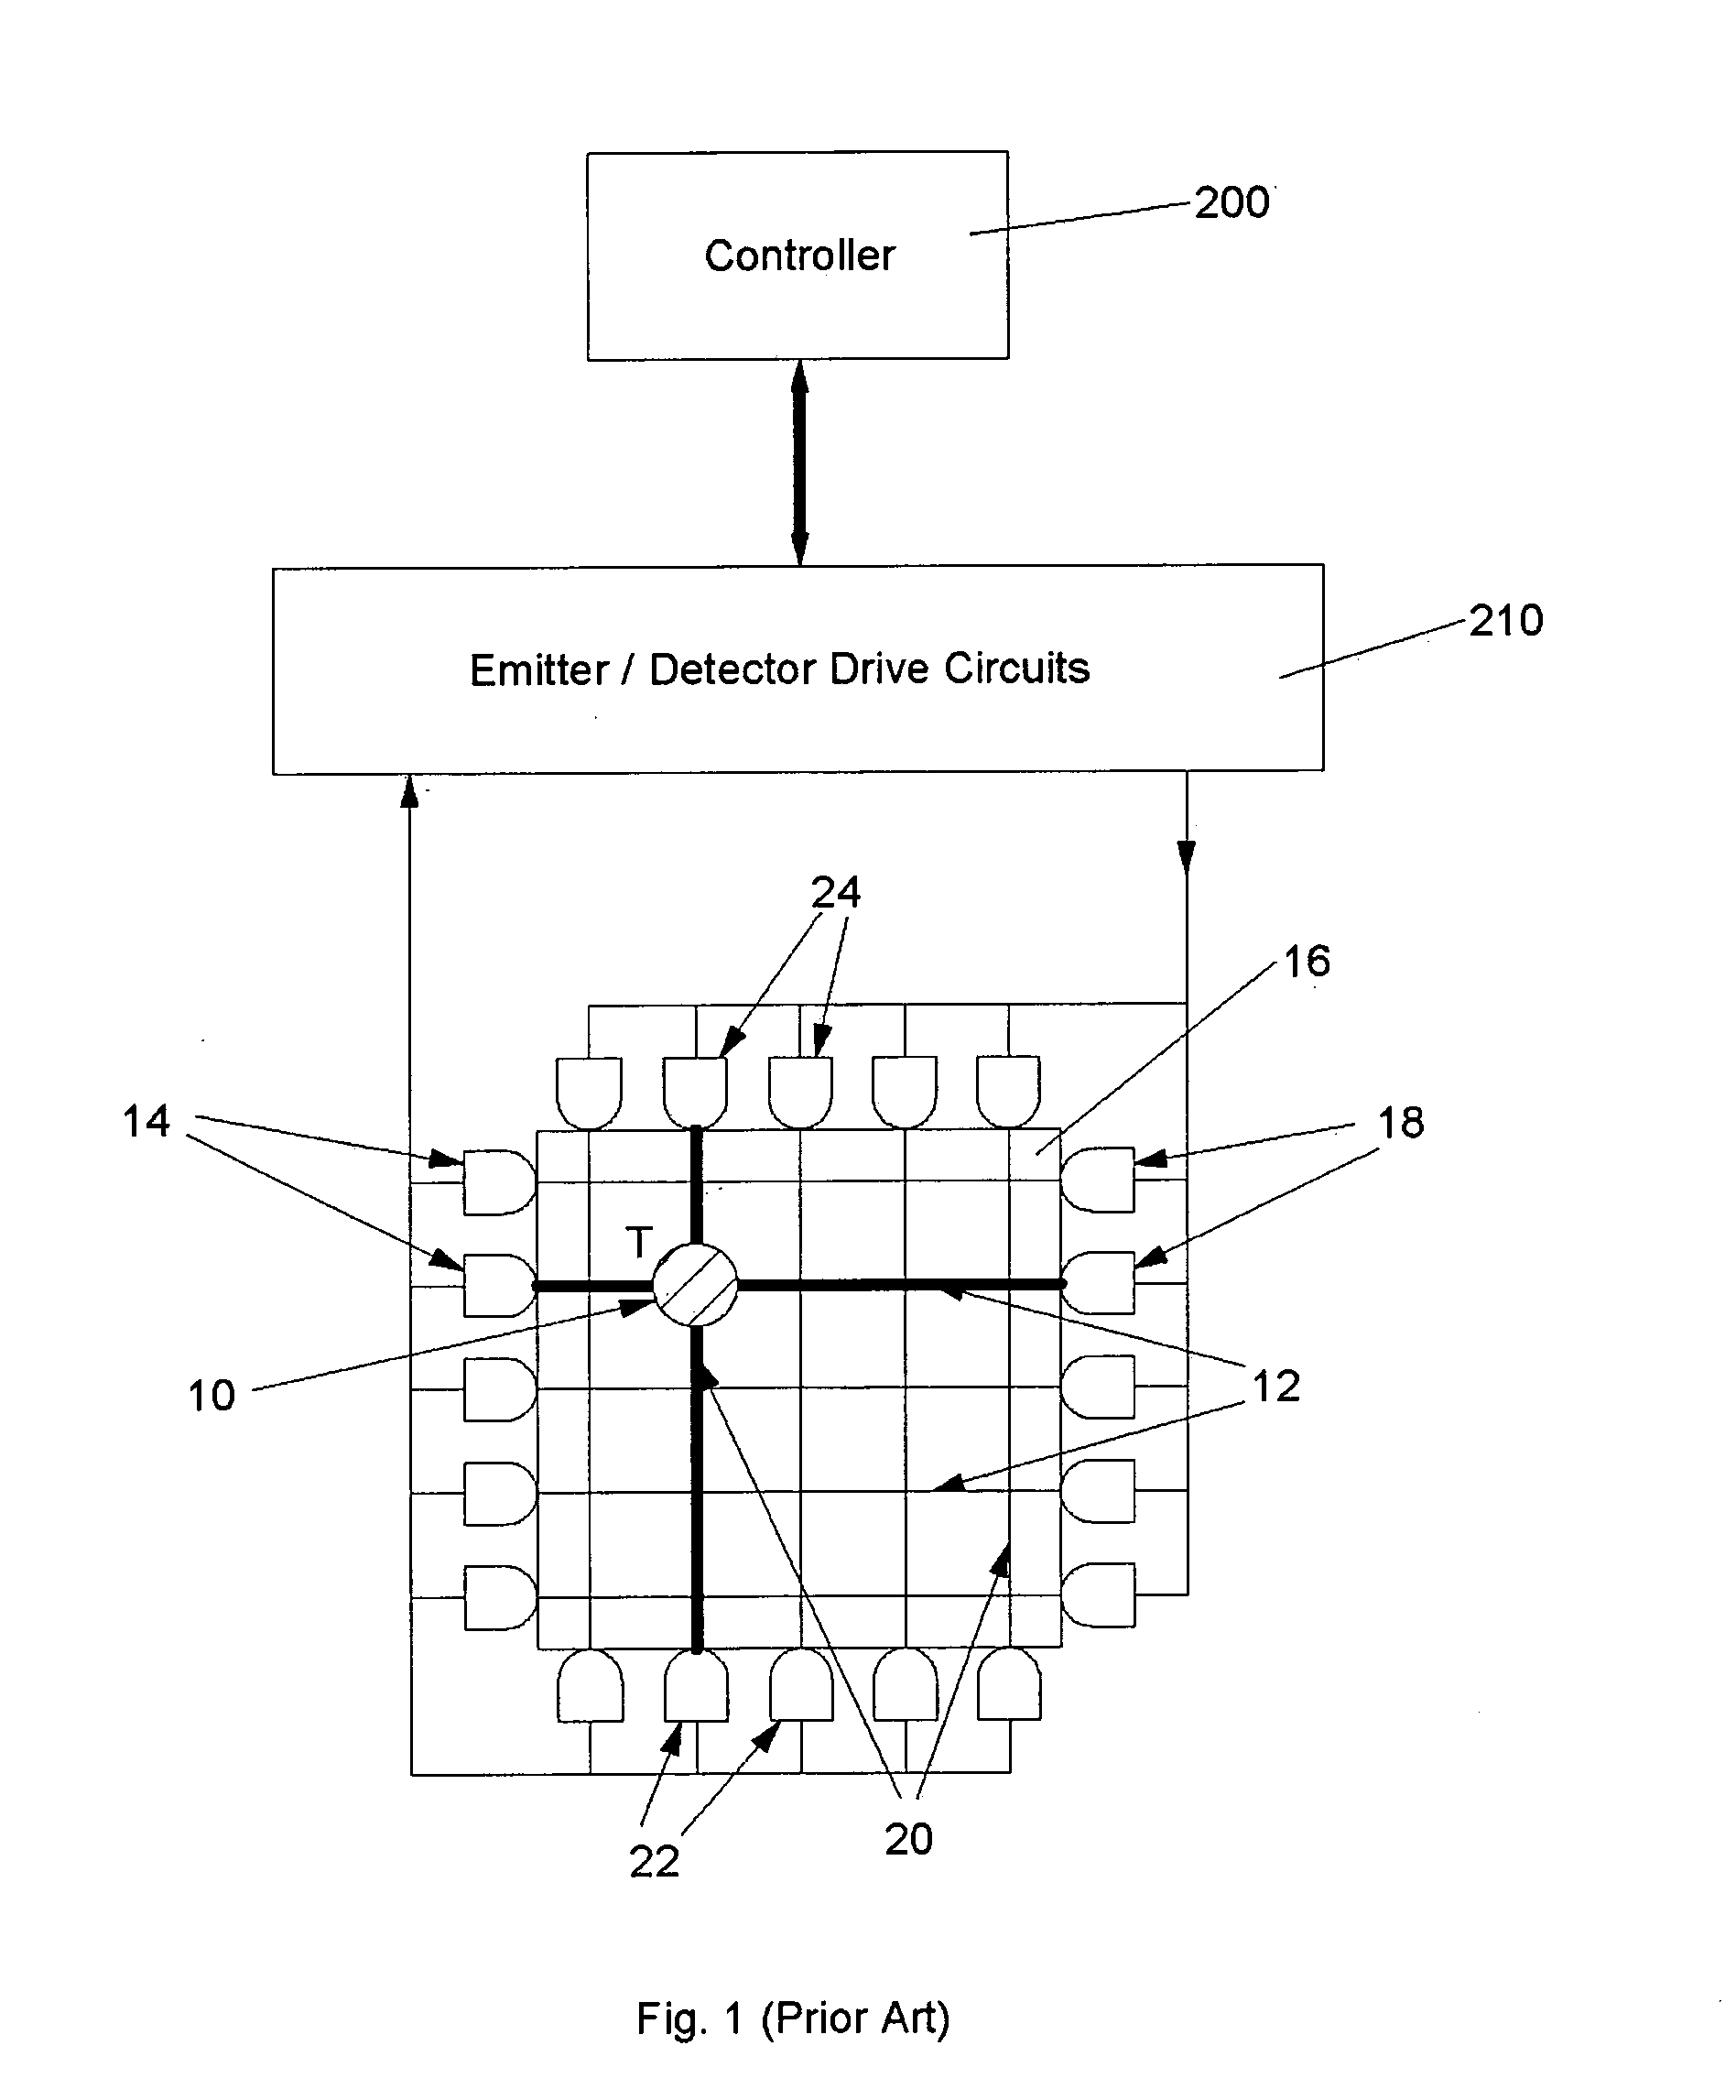 Method and Apparatus For Detecting A Multitouch Event In An Optical Touch-Sensitive Device